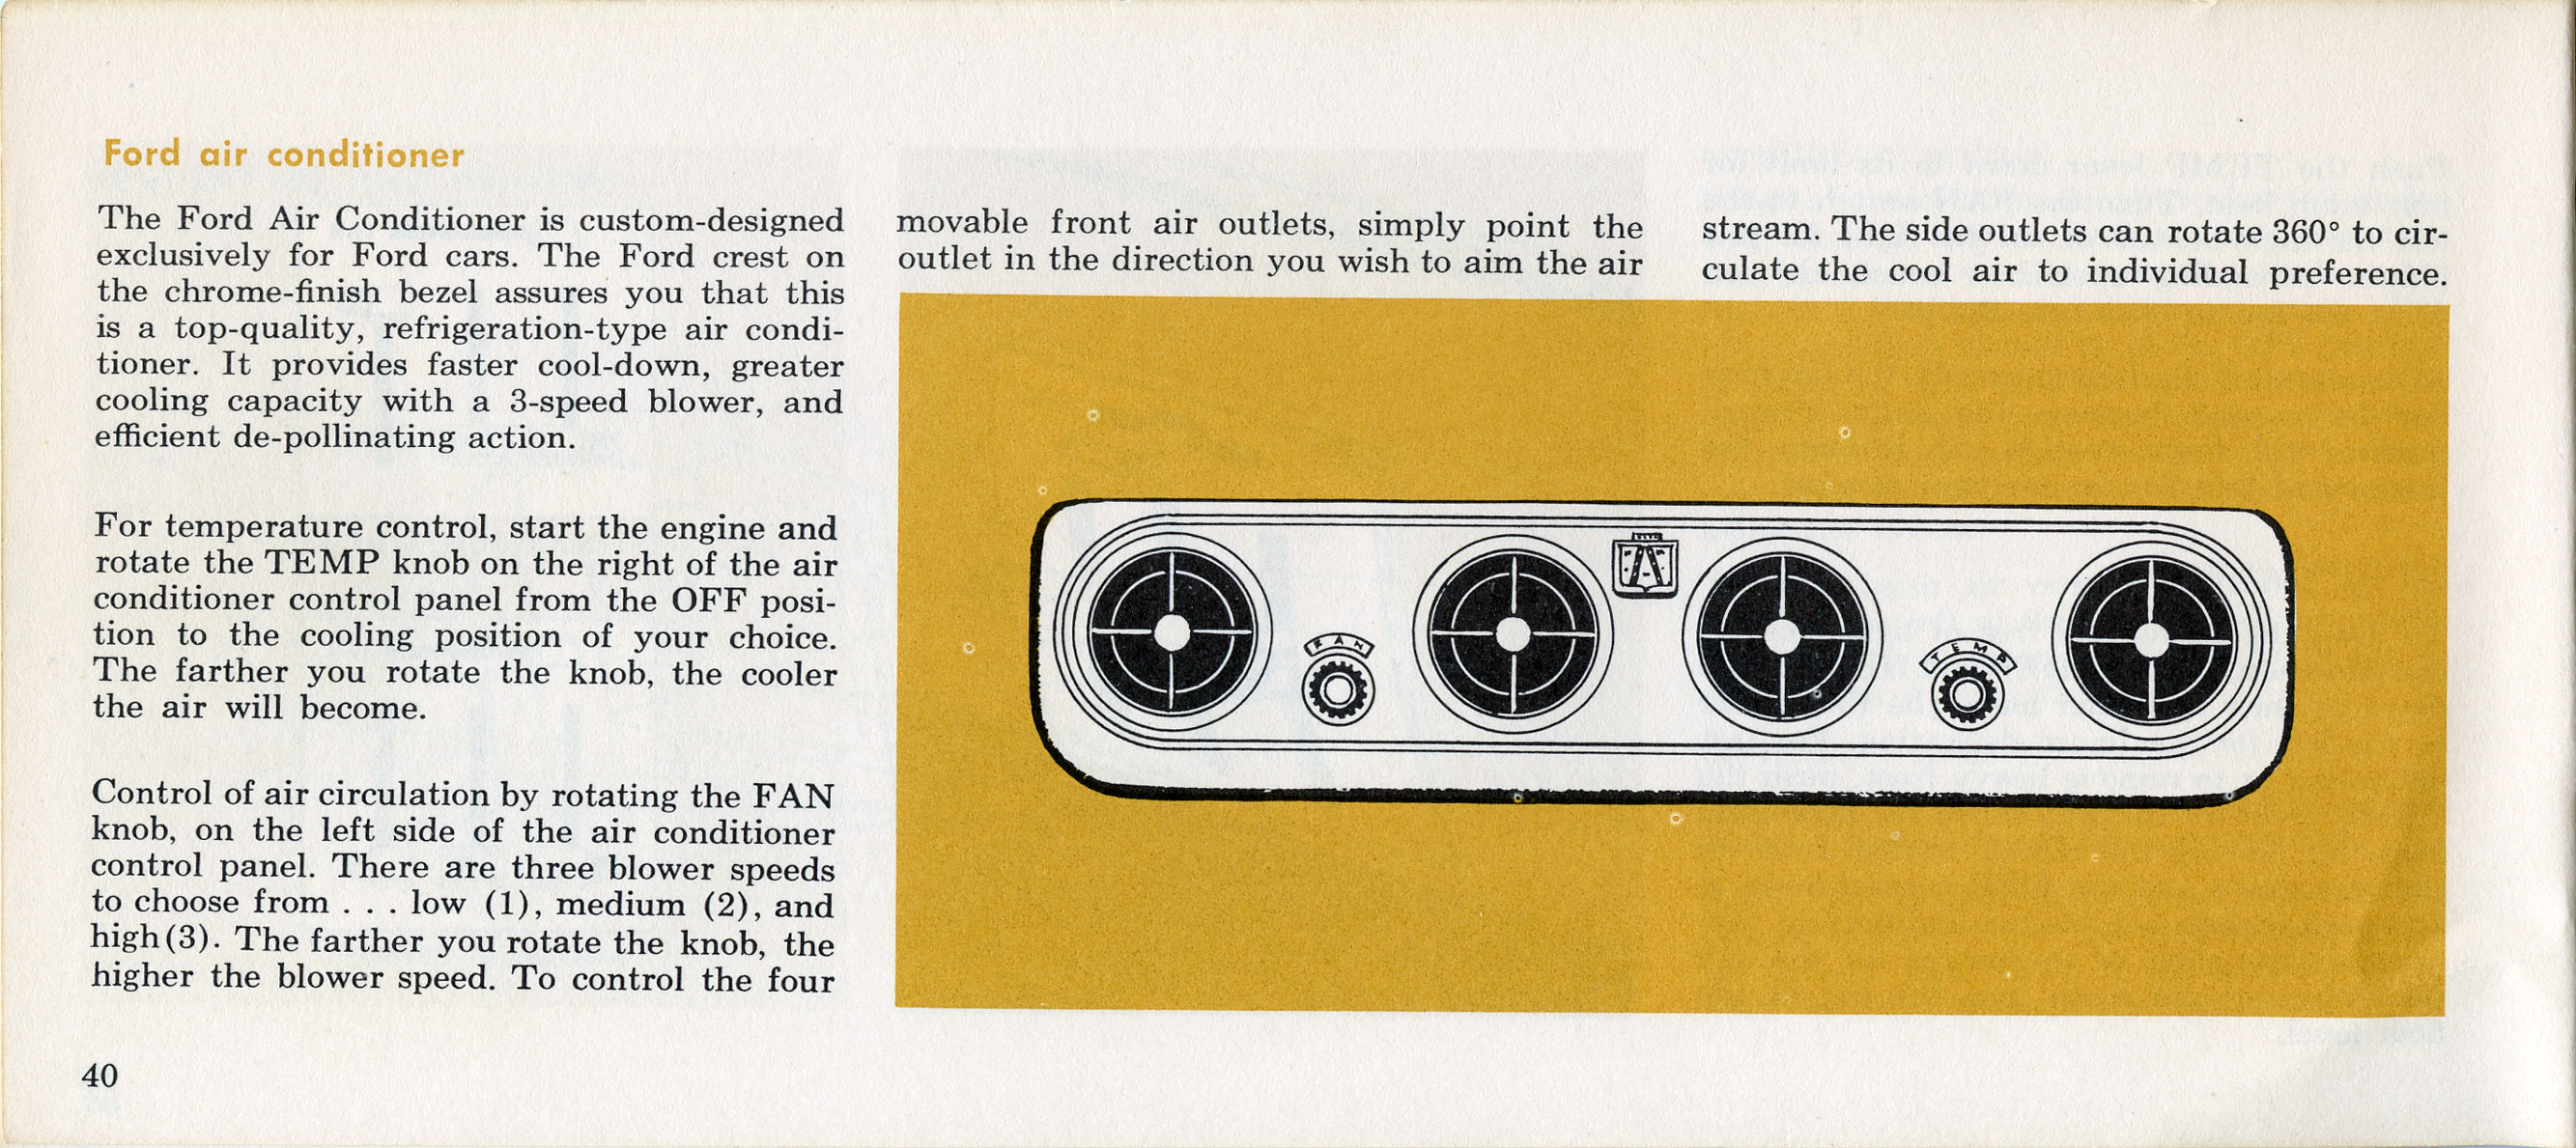 1964 Ford Falcon Owners Manual-40